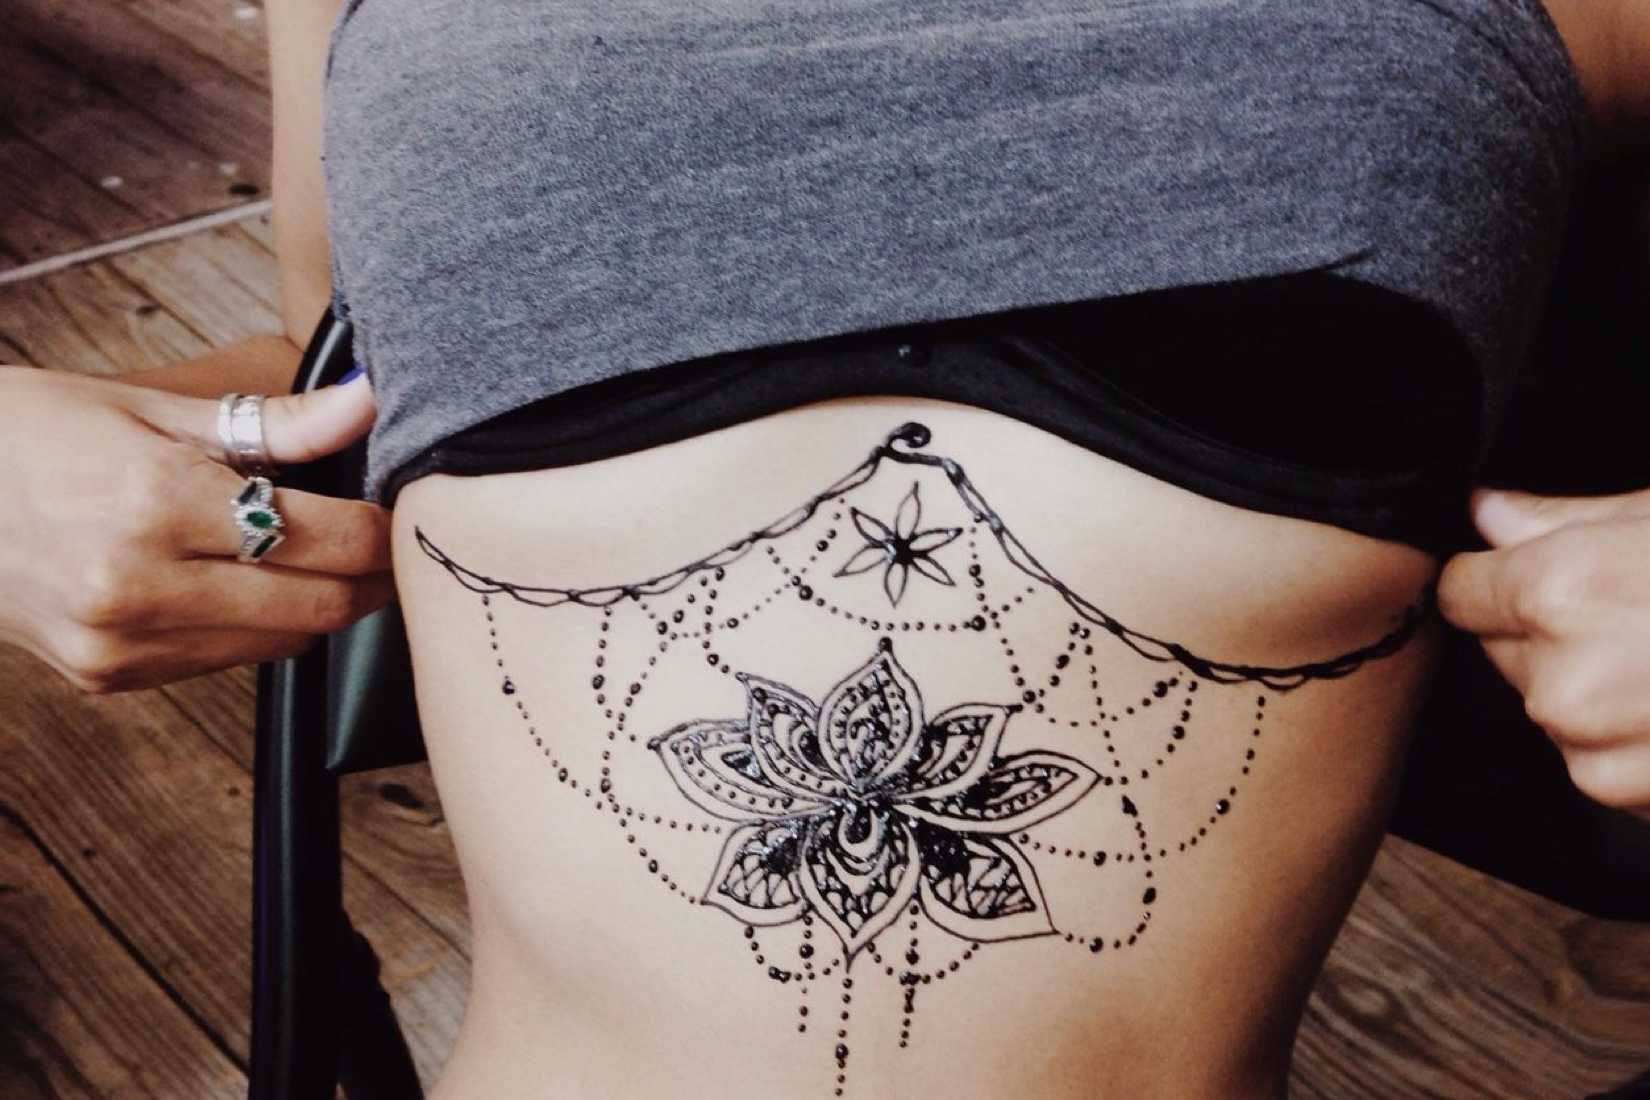 17 Sexy Underboob Tattoos You're Going to Love ...